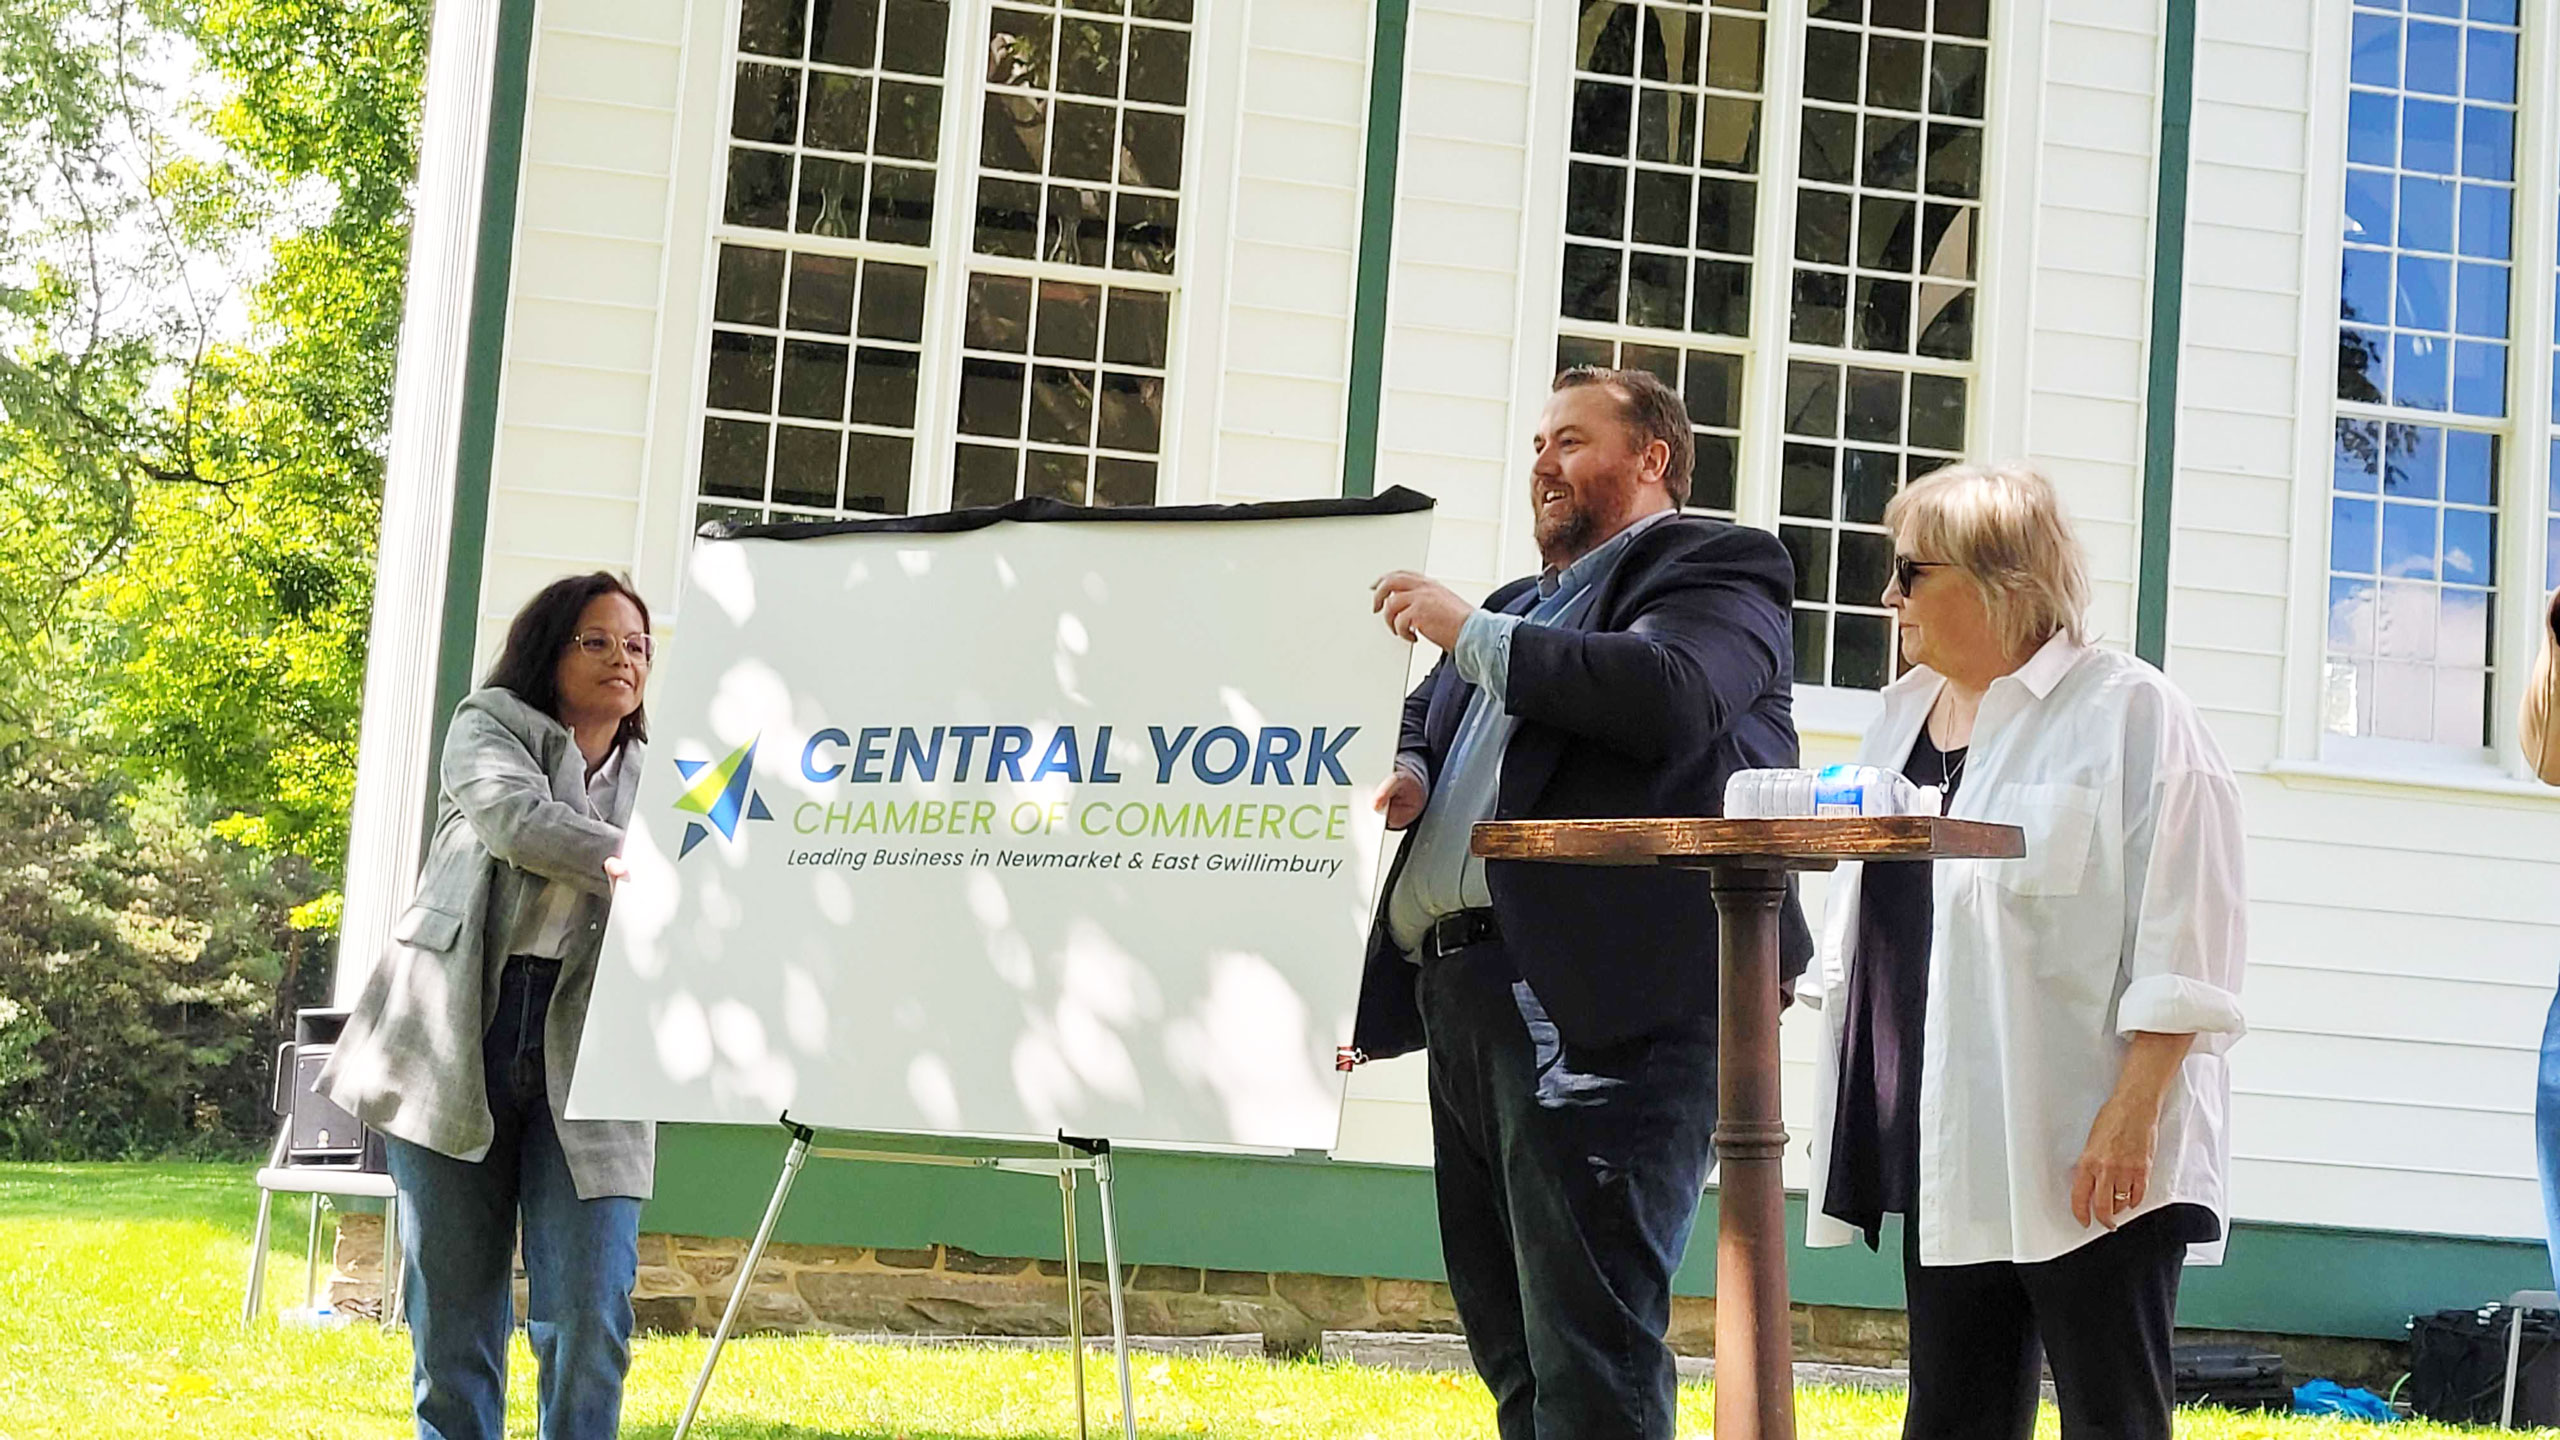 Introducing the Central York Chamber of Commerce featured image